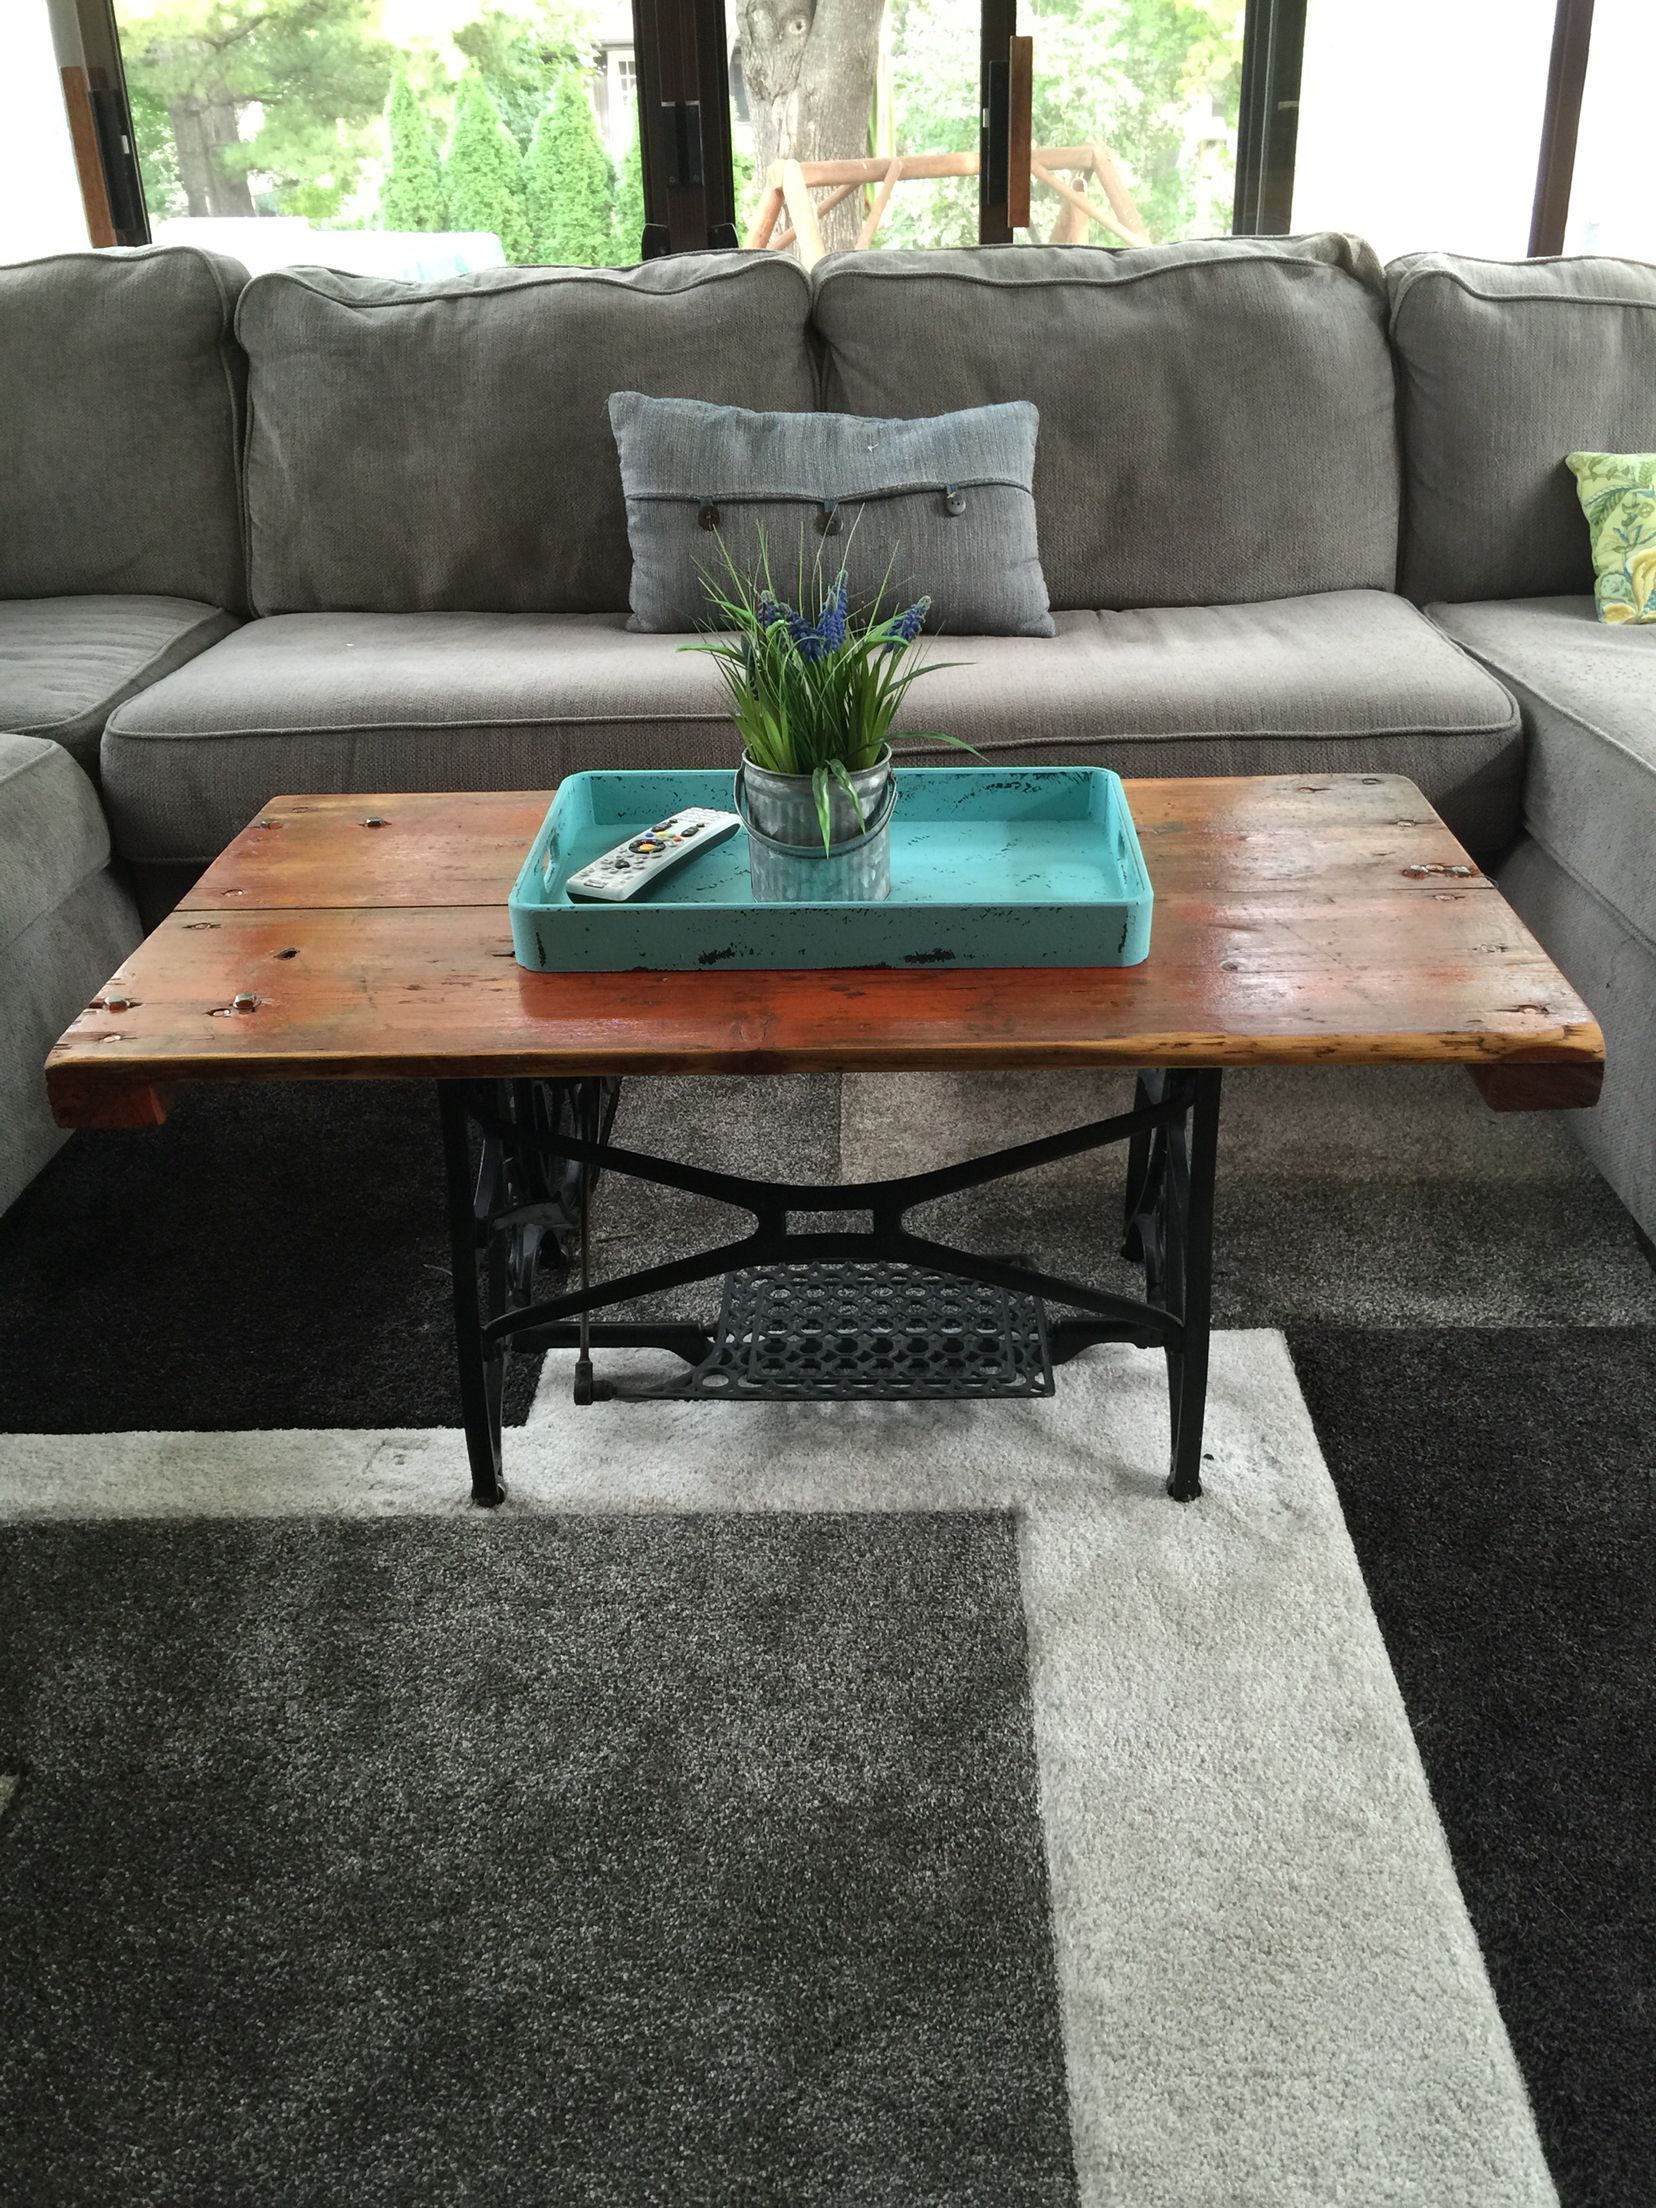 Coffee Table Made From Barn Door And Antique Sewing Machine Base Intended For Coffee Tables With Sliding Barn Doors (View 15 of 20)